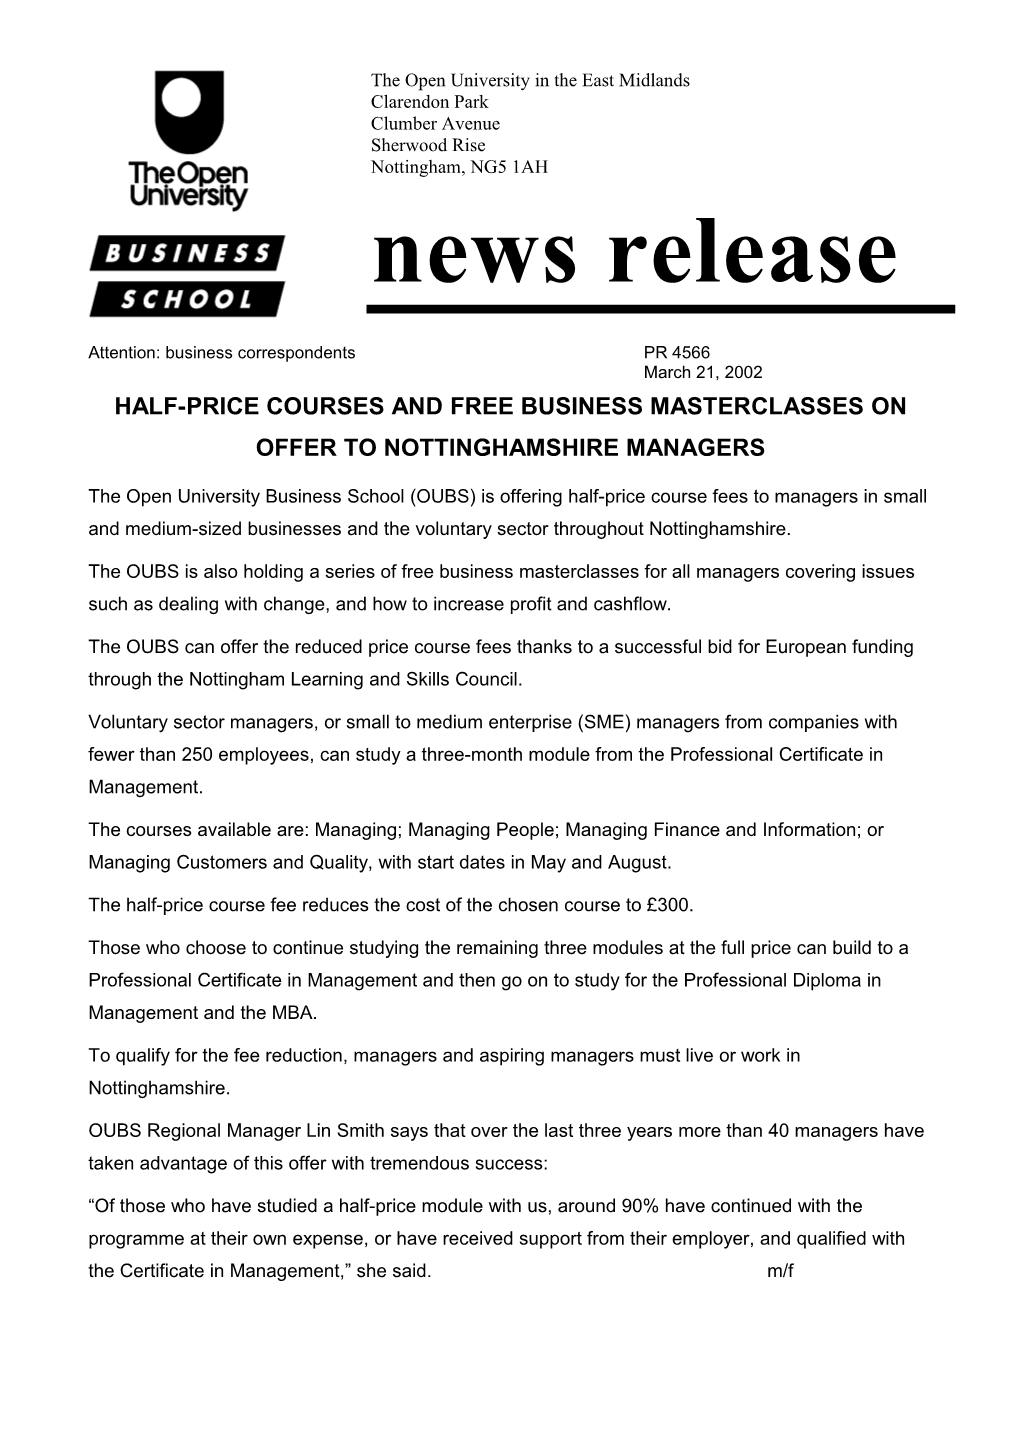 Half-Price Courses and Free Business Masterclasses on Offer to Nottinghamshire Managers